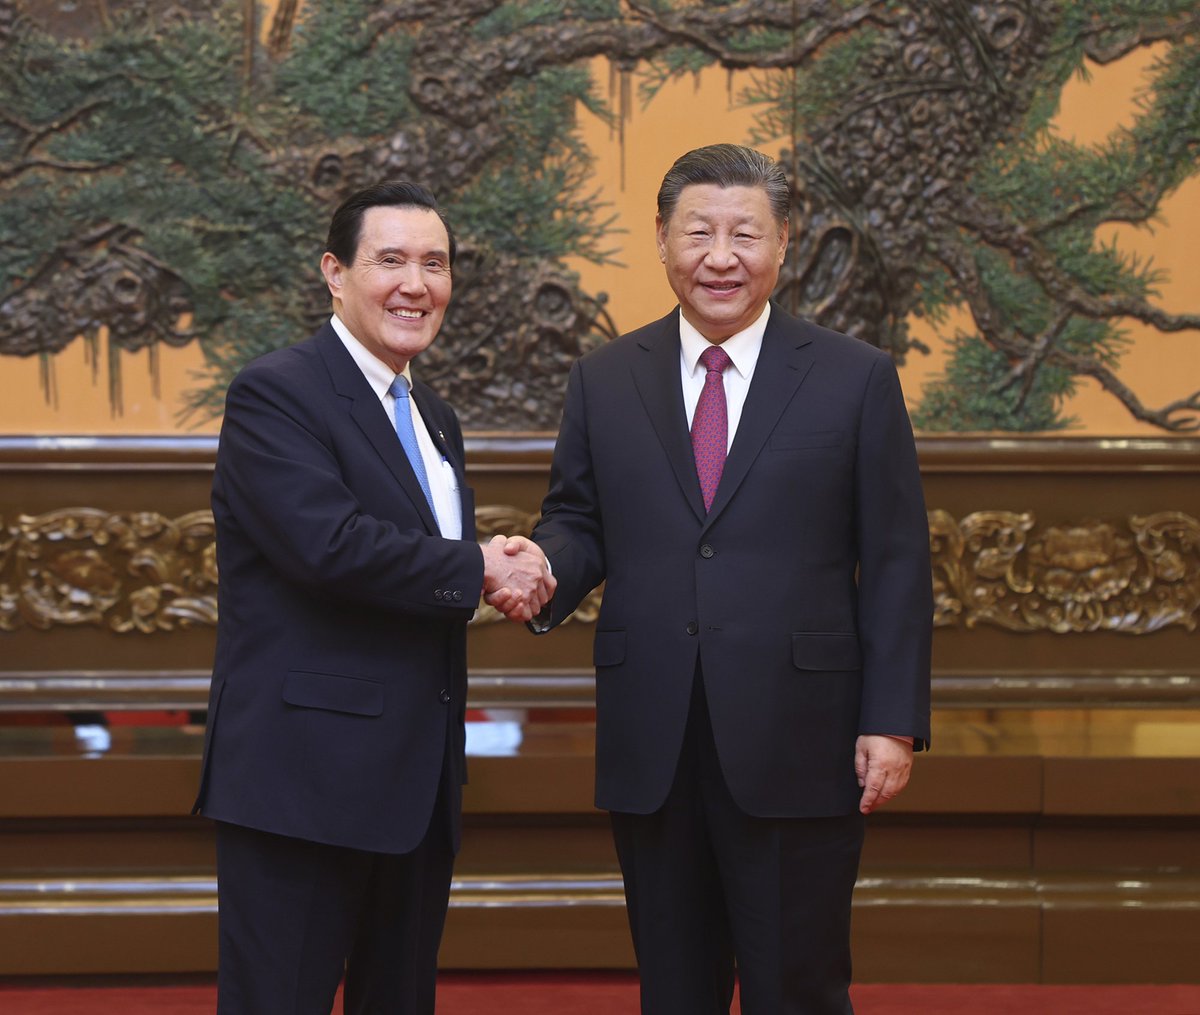 Ma Ying-jeou: People on both sides of the Straits belong to the same Chinese nation. They should deepen exchanges & cooperation, jointly carry forward Chinese culture, improve the wellbeing of compatriots on both sides, and work together for the rejuvenation of the Chinese nation